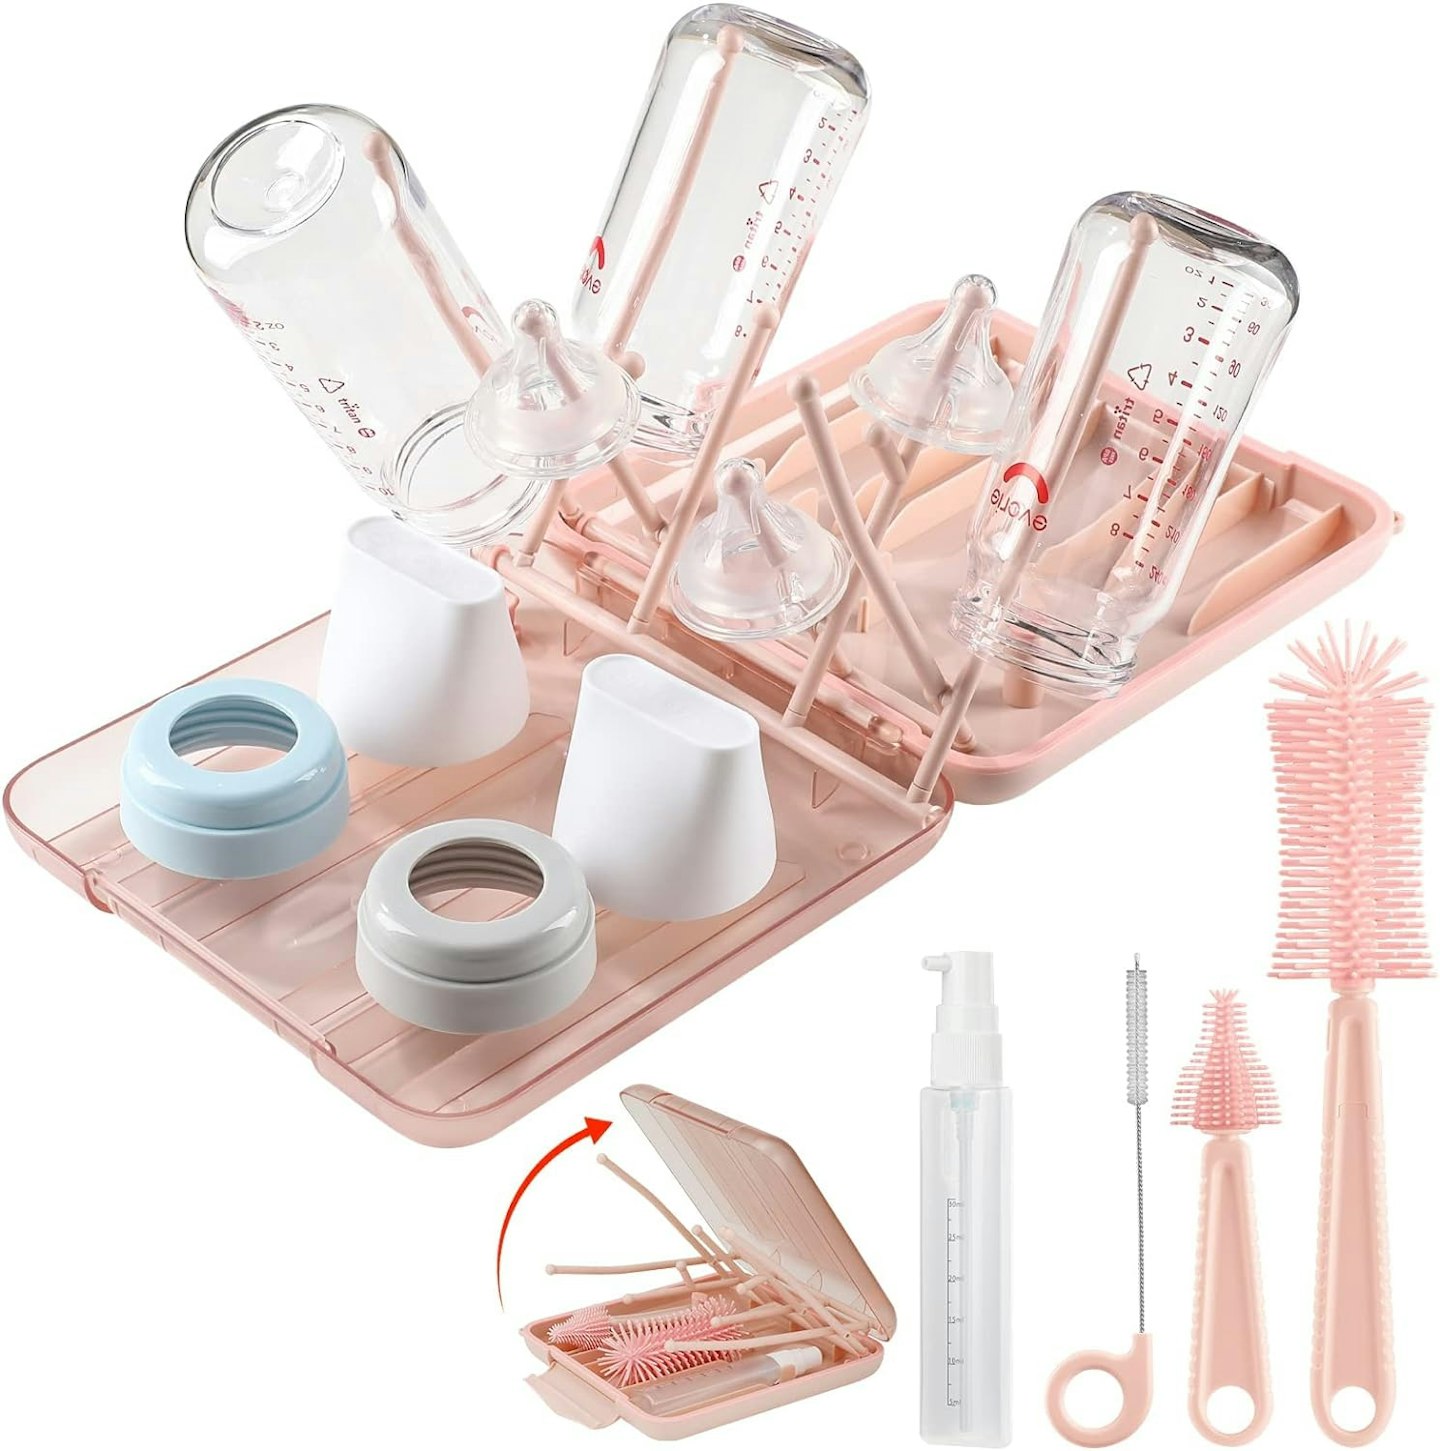 6 in 1 Baby Bottle Cleaner Kit with Drying Rack